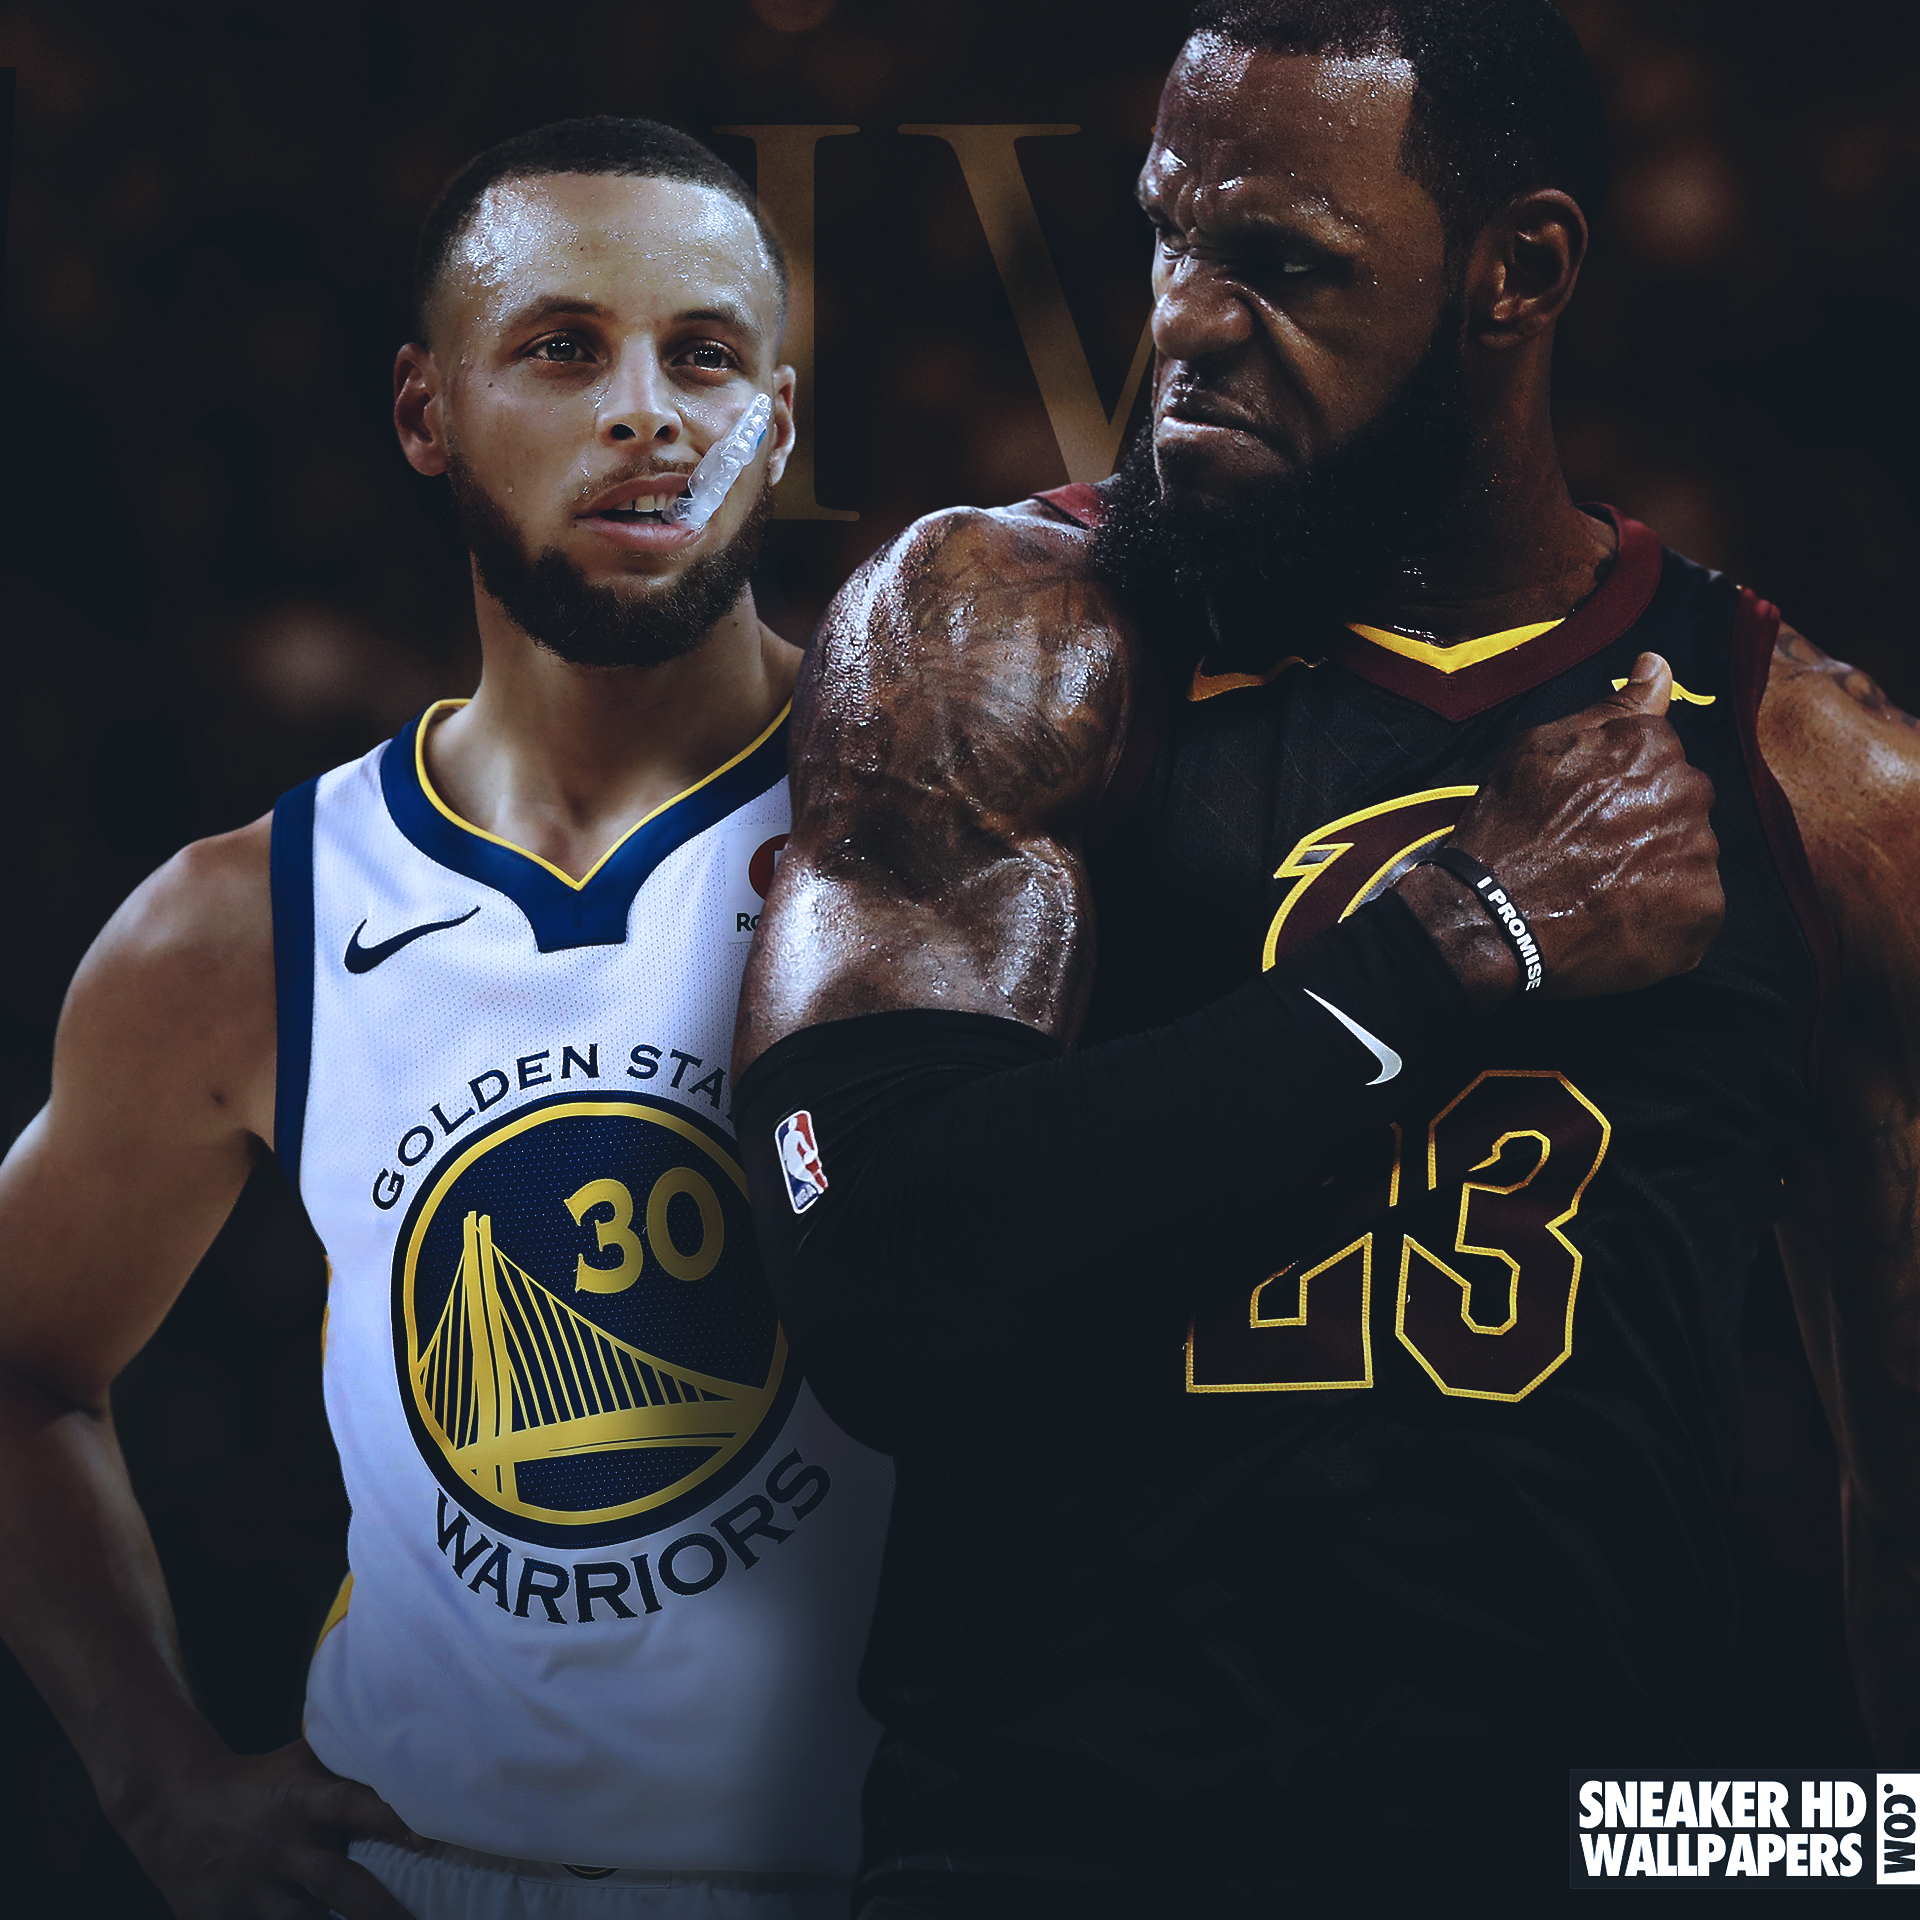 wallpaper curry lebron